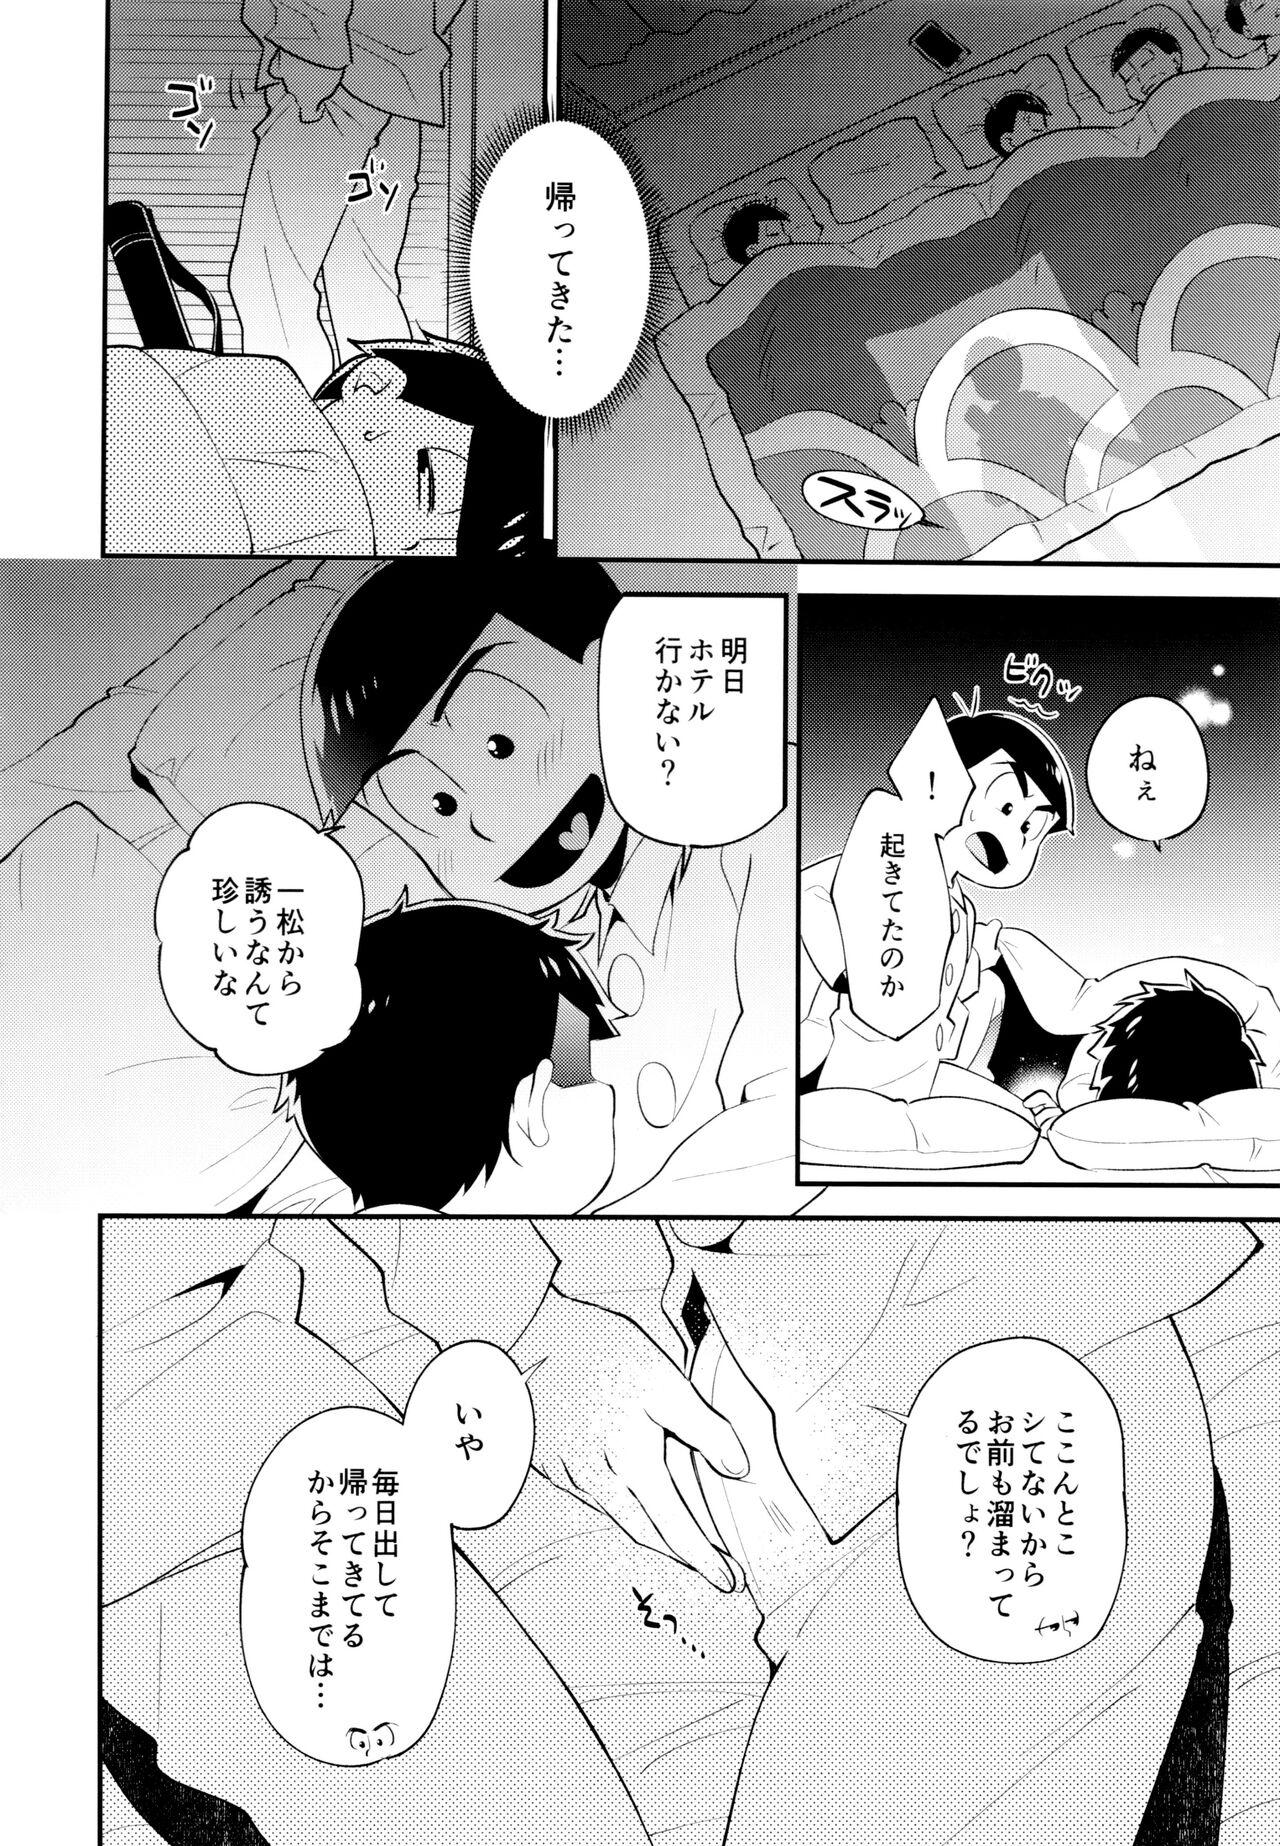 Chica Our Six-Day Sexual War - Osomatsu-san Hoe - Page 9